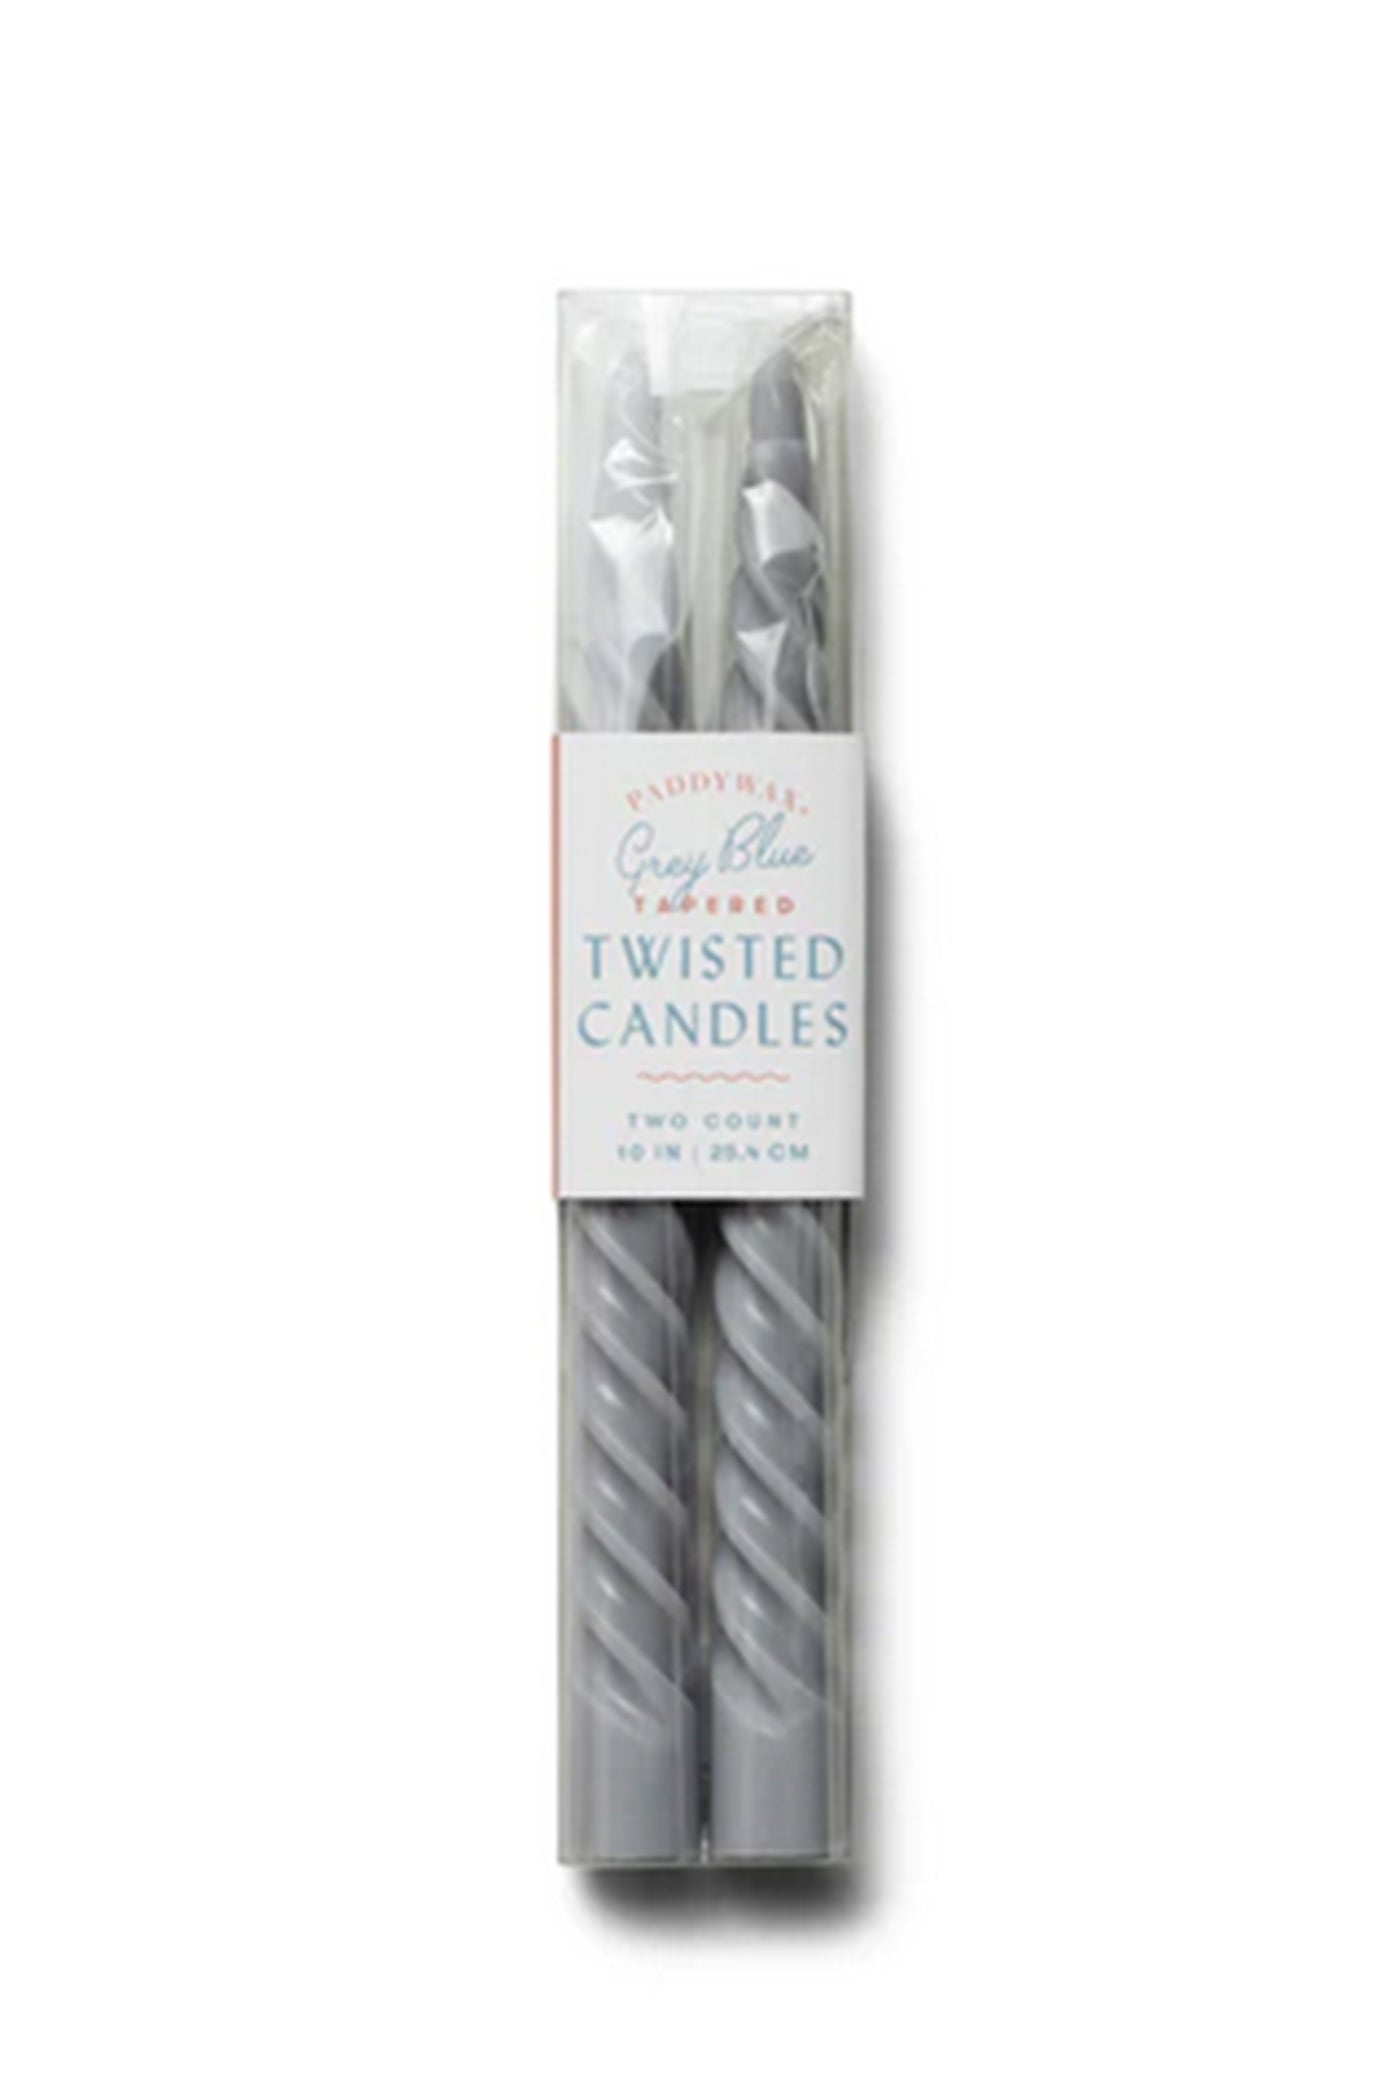 Grey Blue Twisted Taper Candles by Paddywax